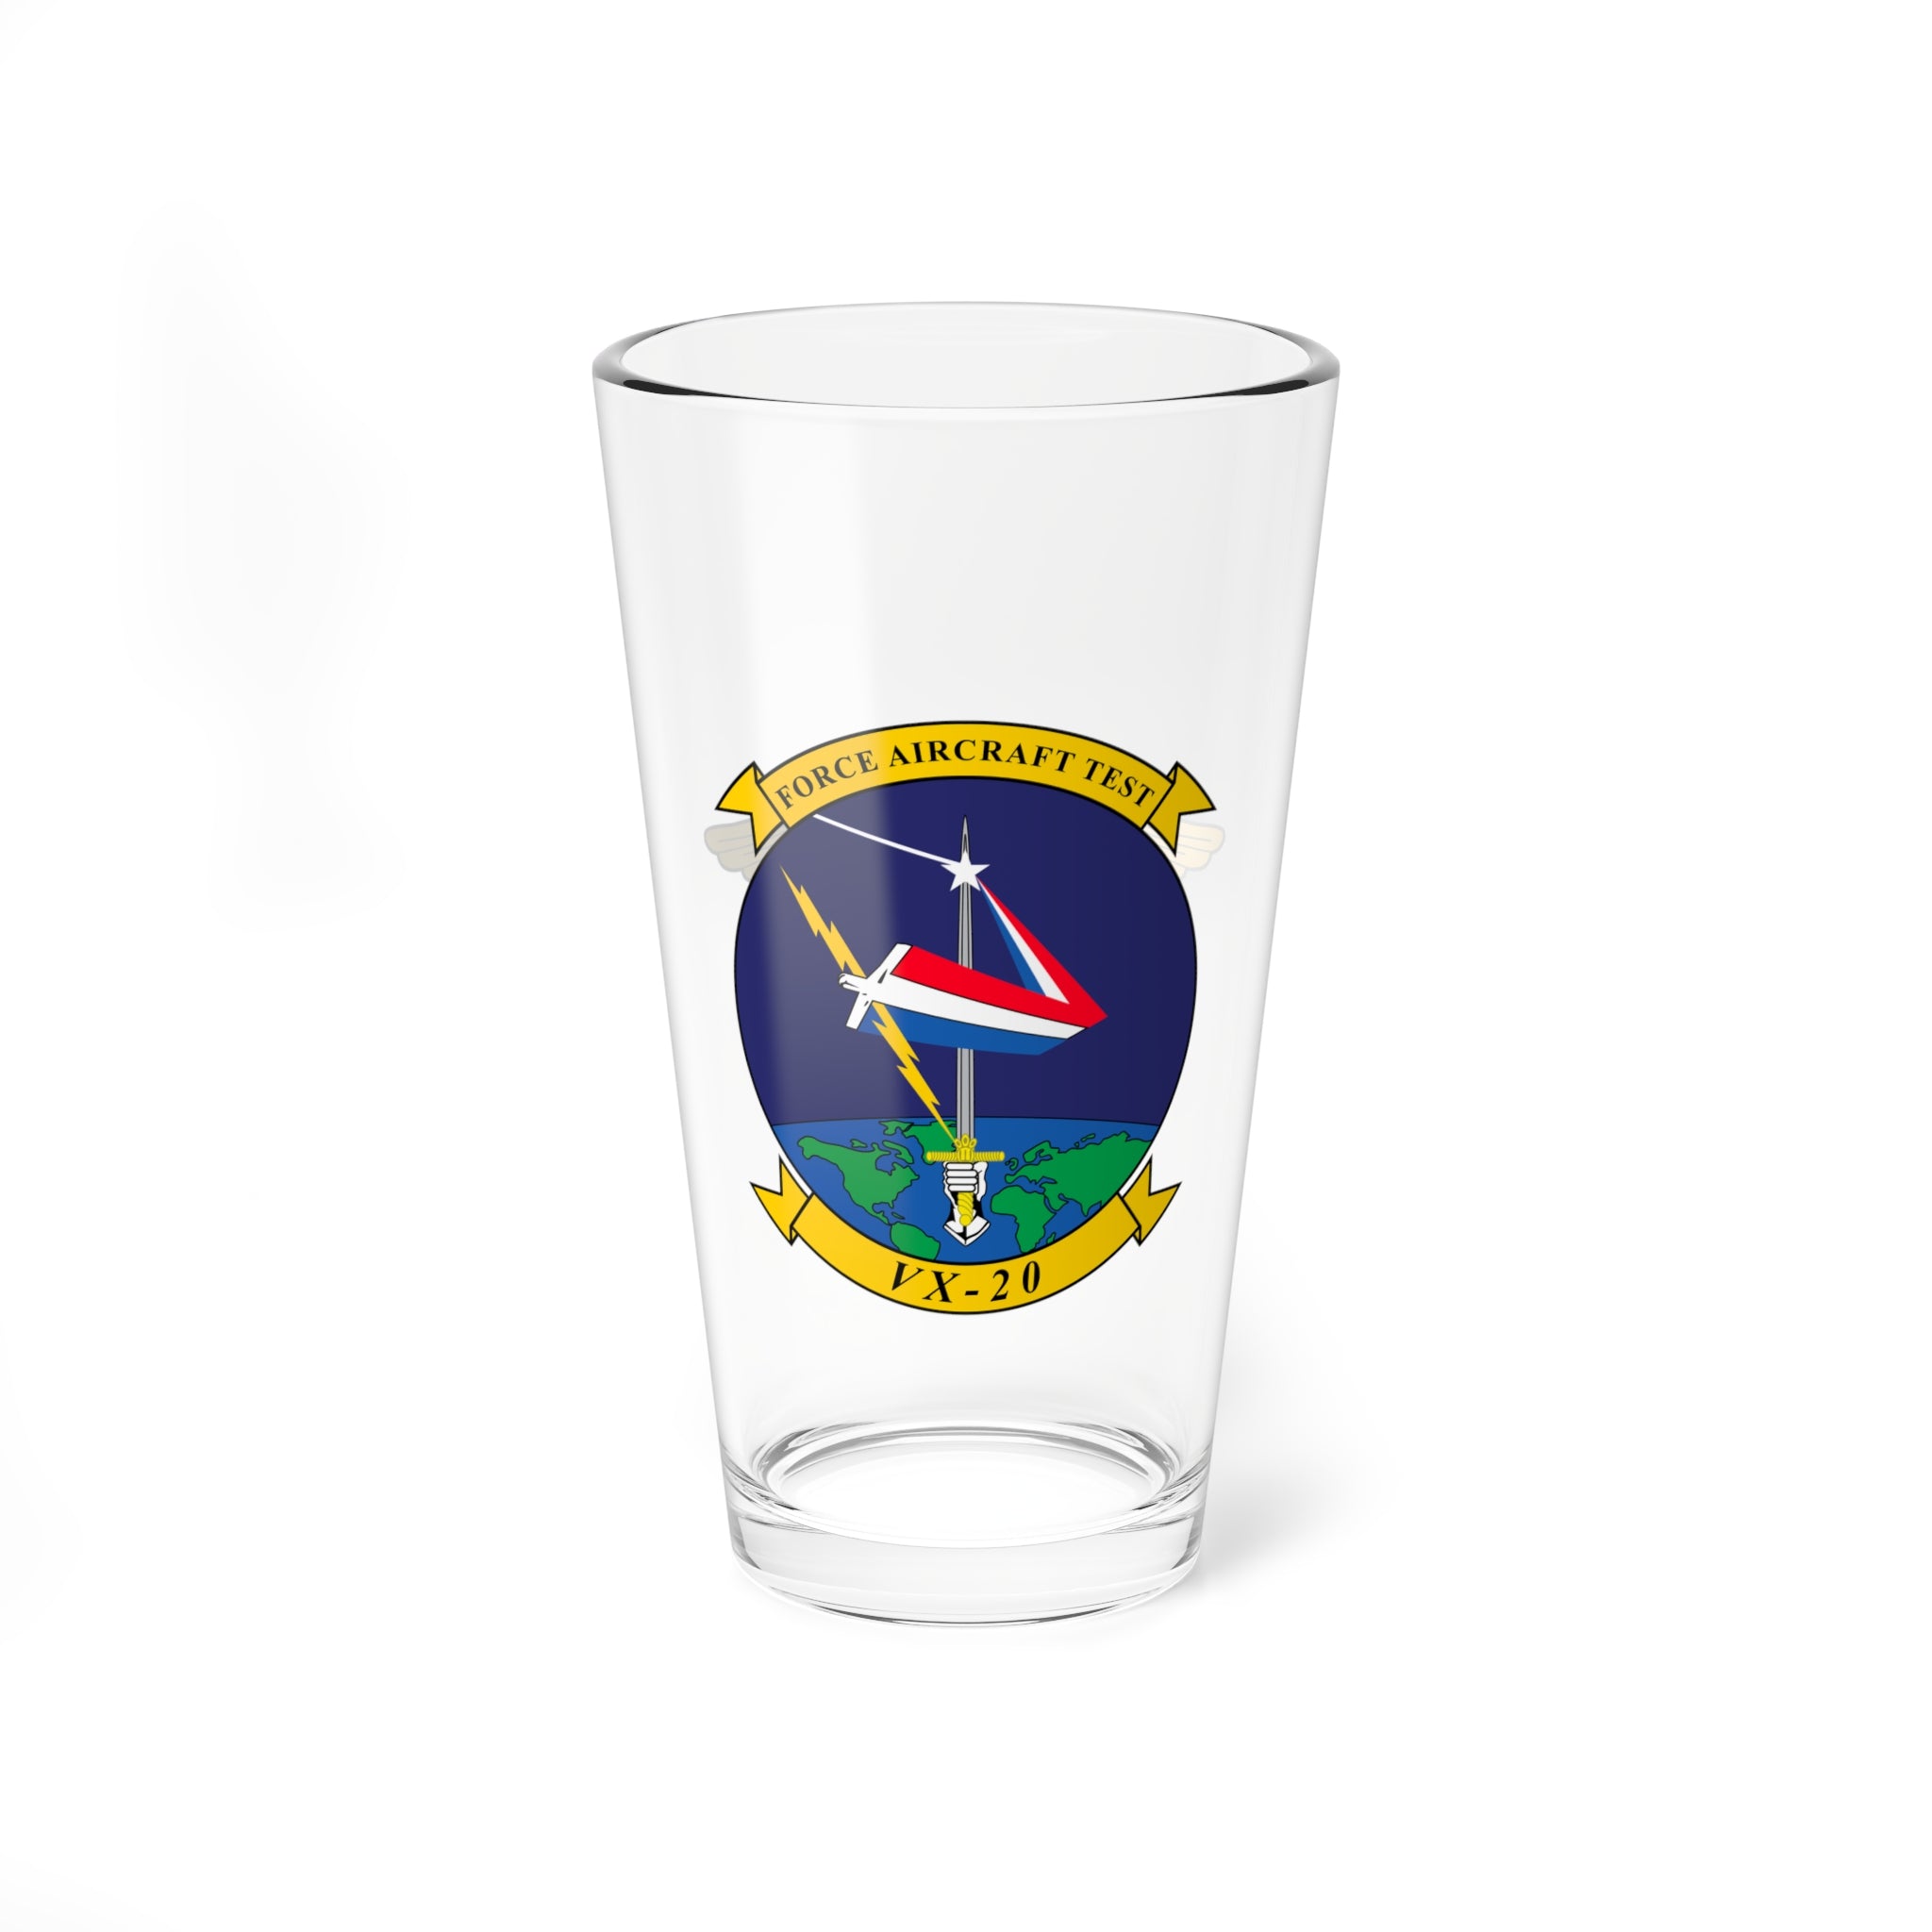 VX-20 "Force" Aviator Pint Glass, 16oz, Navy Test and Evaluation Squadron flying Multiple Aircraft